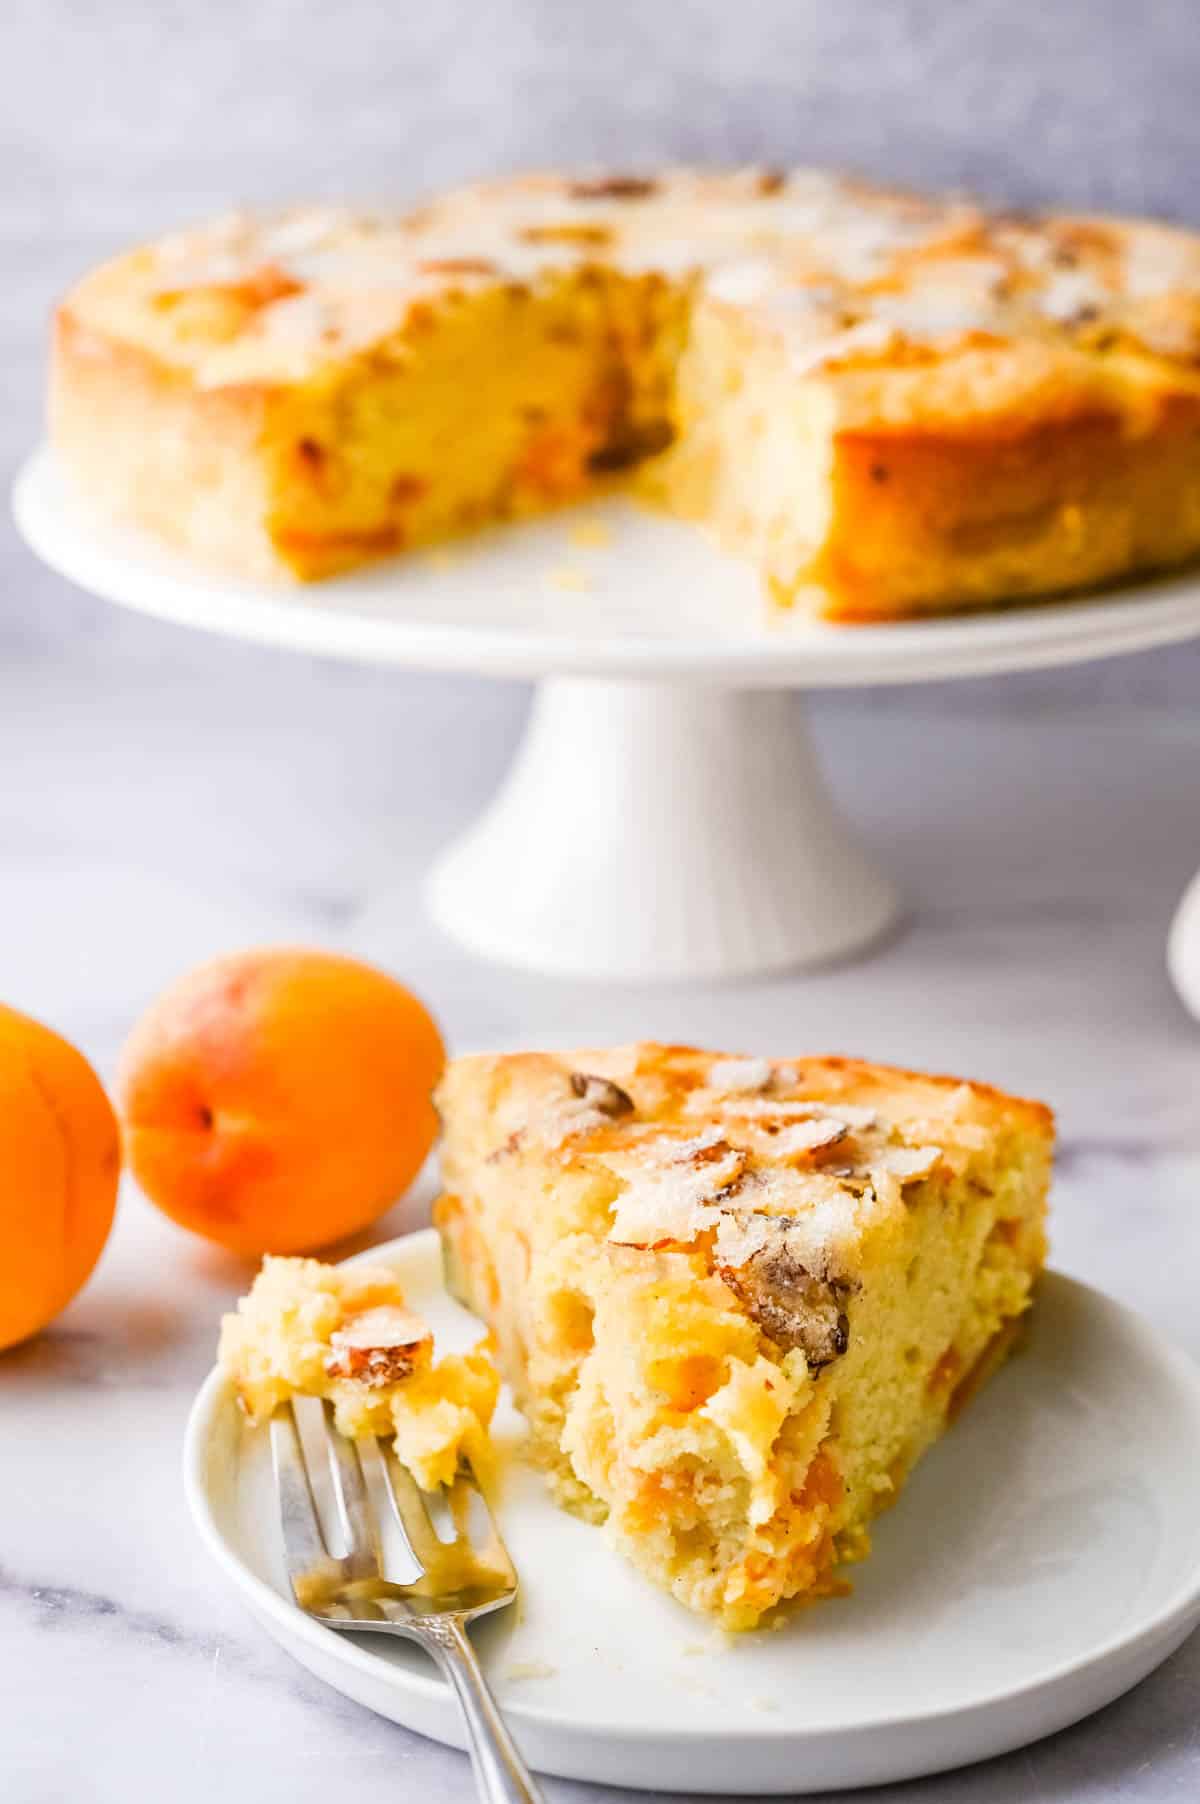 A piece of apricot cake on a plate with the cake stand in the background.